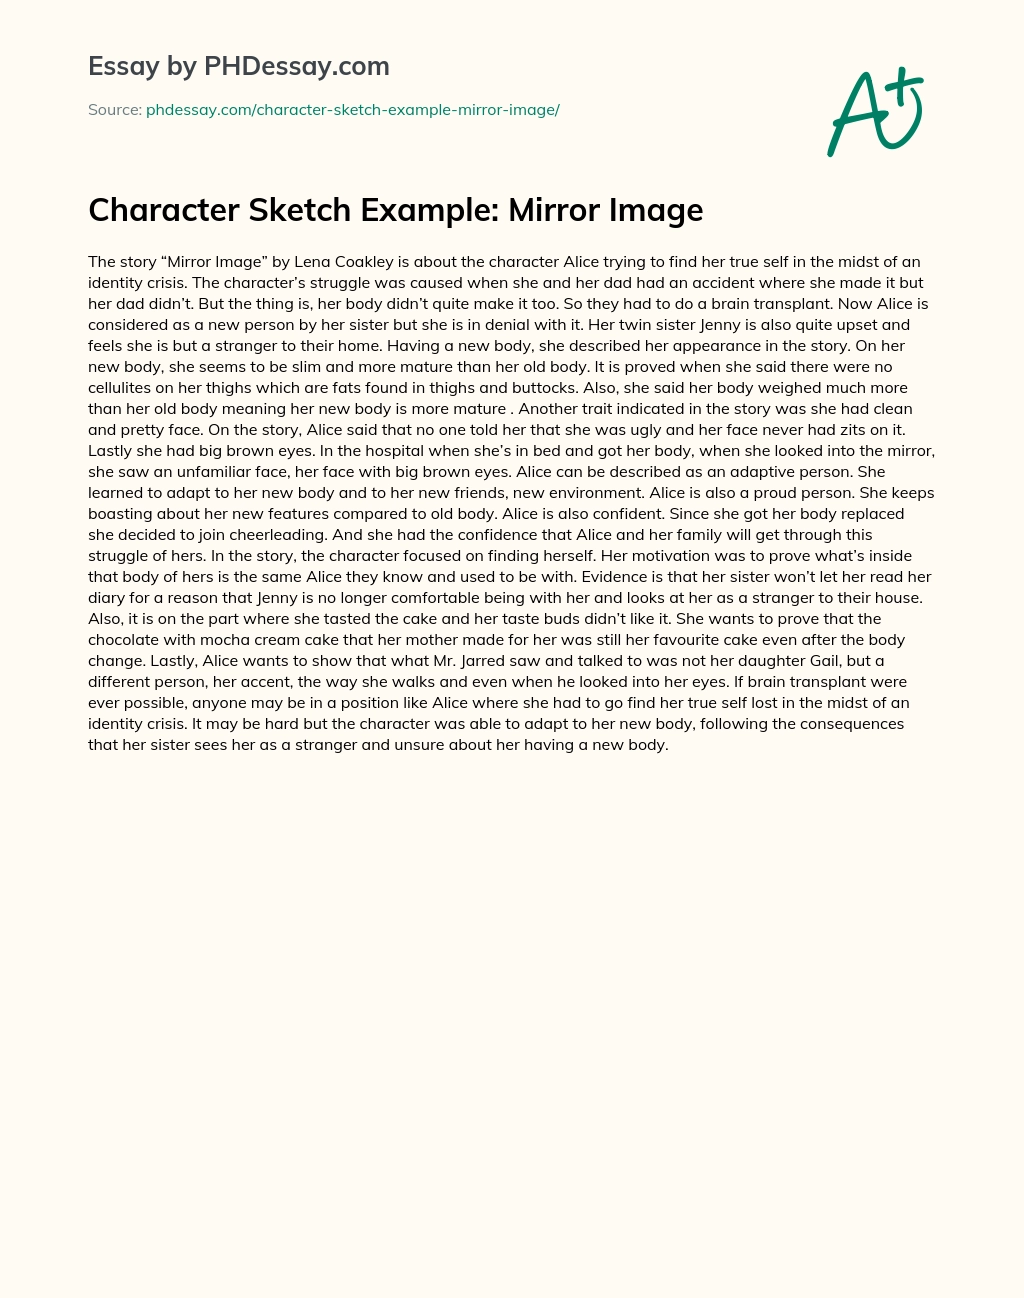 Character Sketch Example: Mirror Image essay